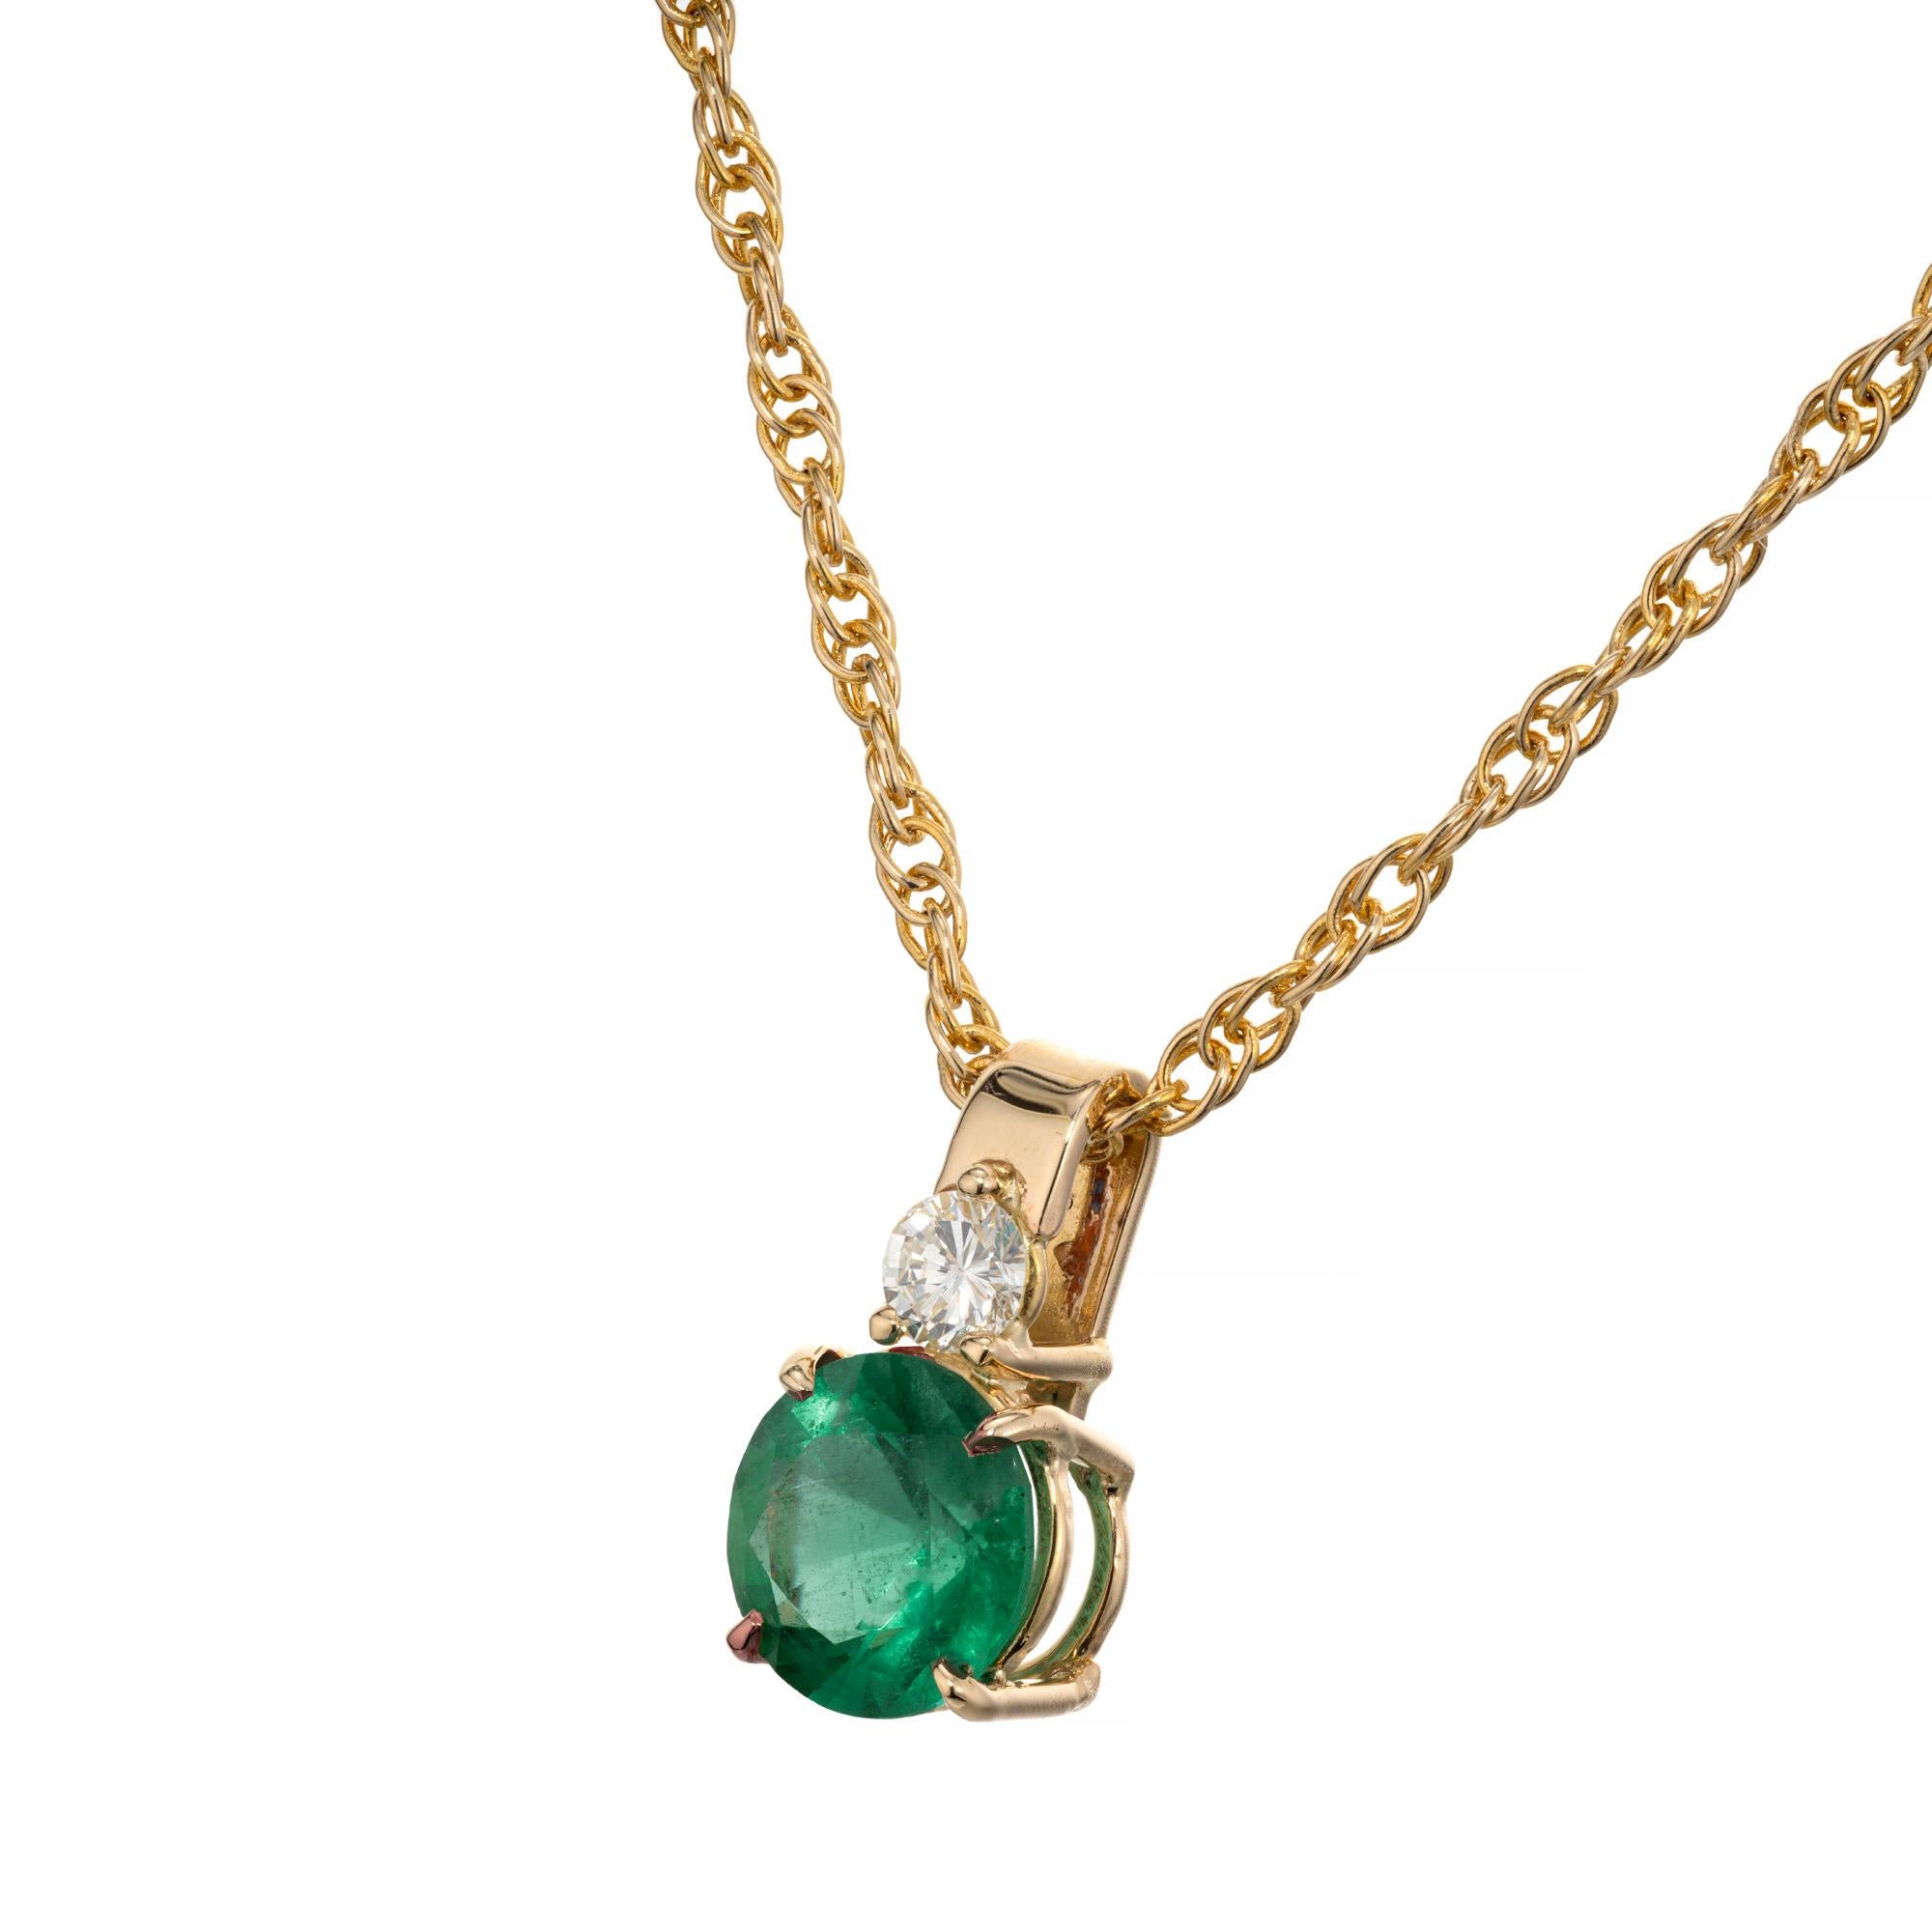 Peter Suchy GIA Certified 1.08 Carat Emerald Diamond Gold Pendant Necklace For Sale 1